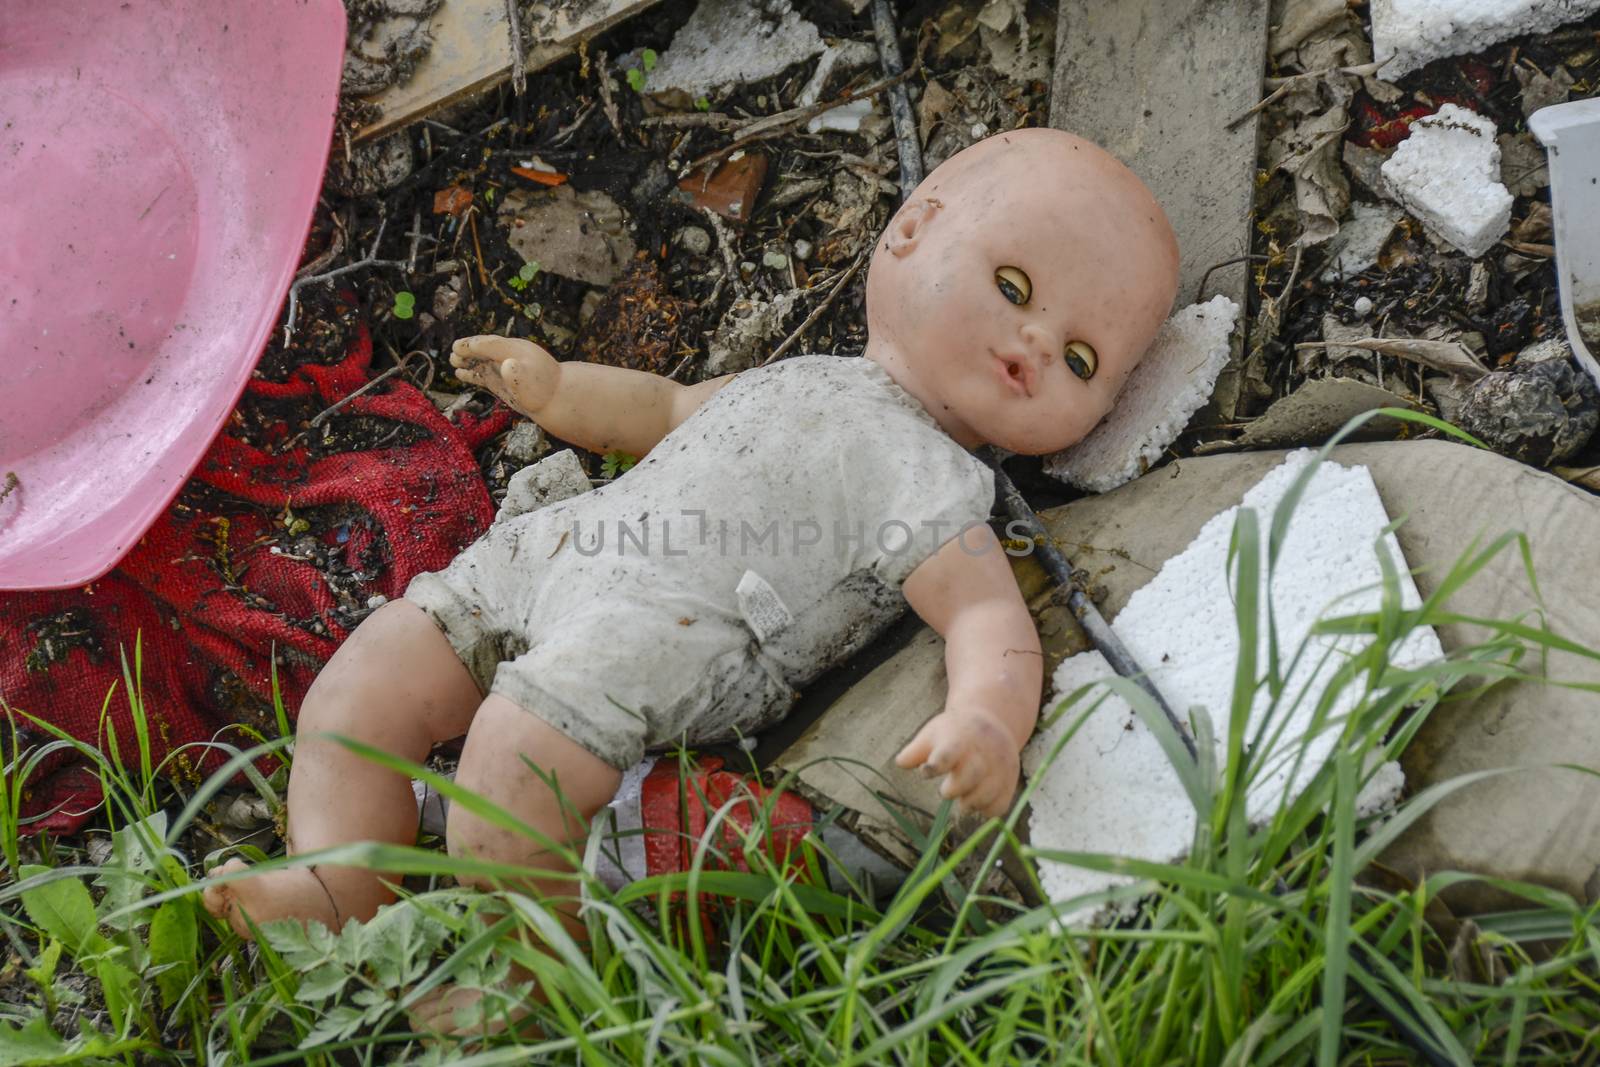 toy doll is completely left alone among the rubbish